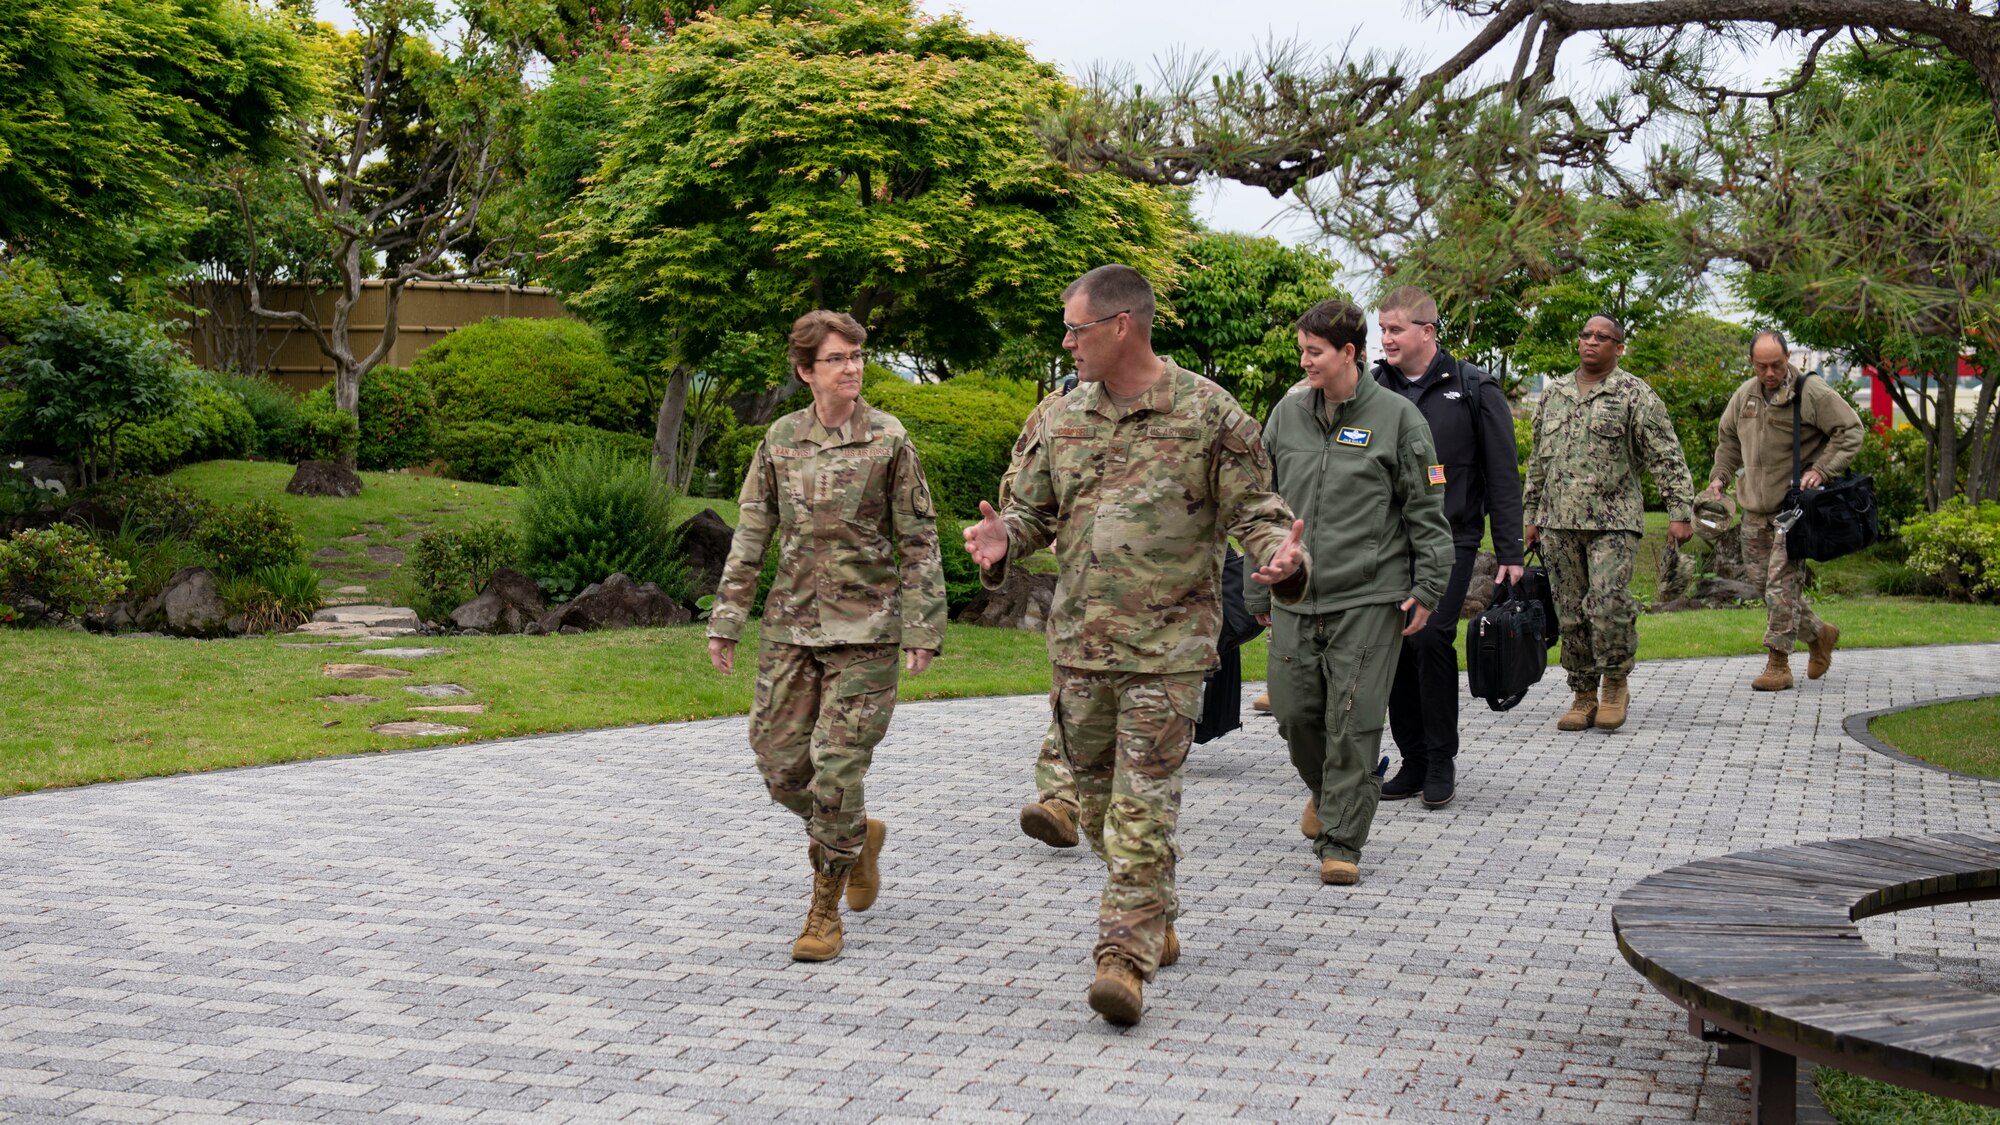 A female general and several other officers walk through a Japanese garden